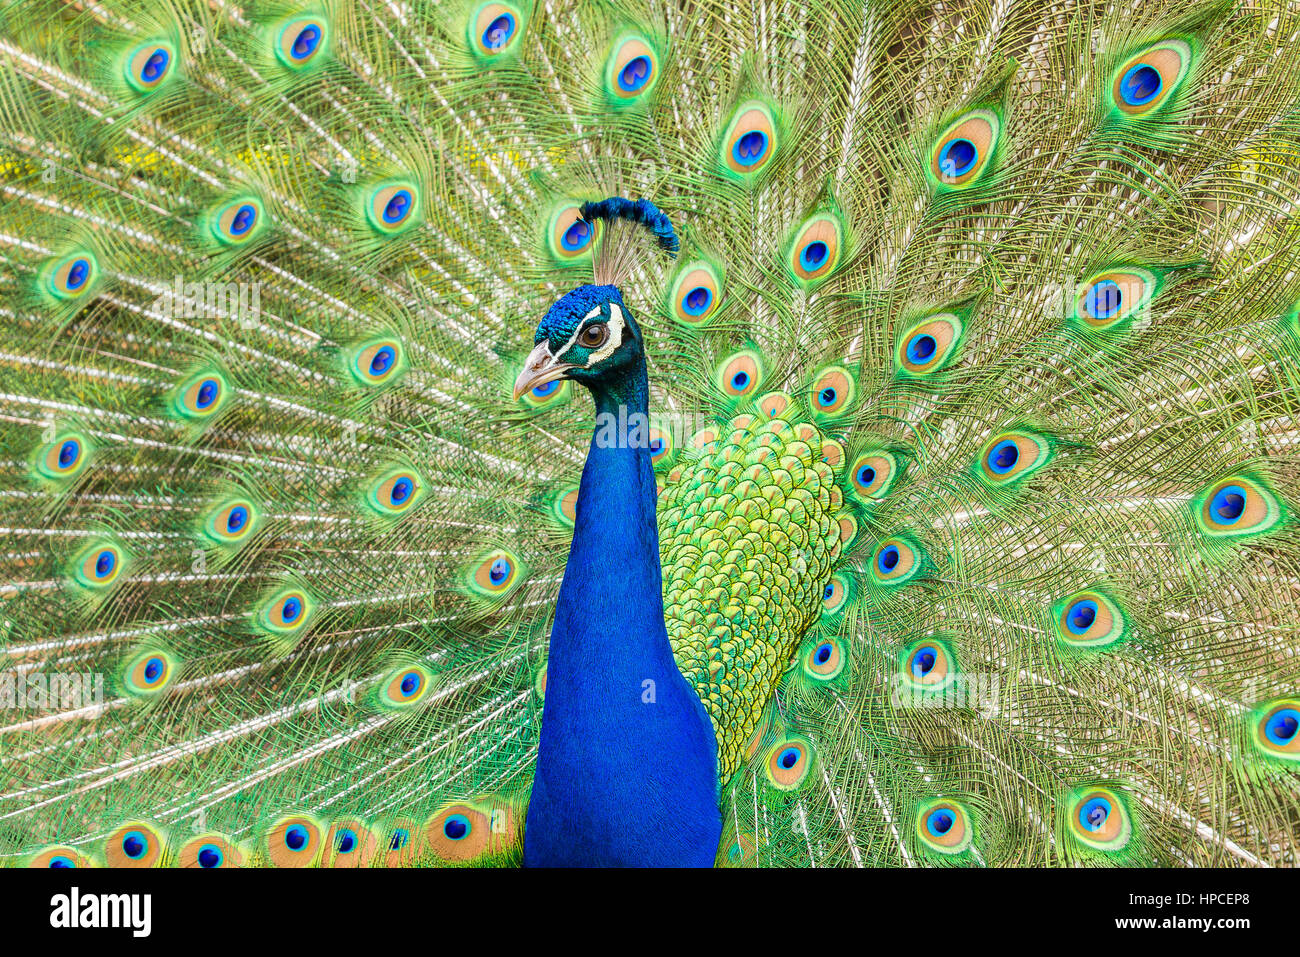 Peacock with tail fanned out Stock Photo